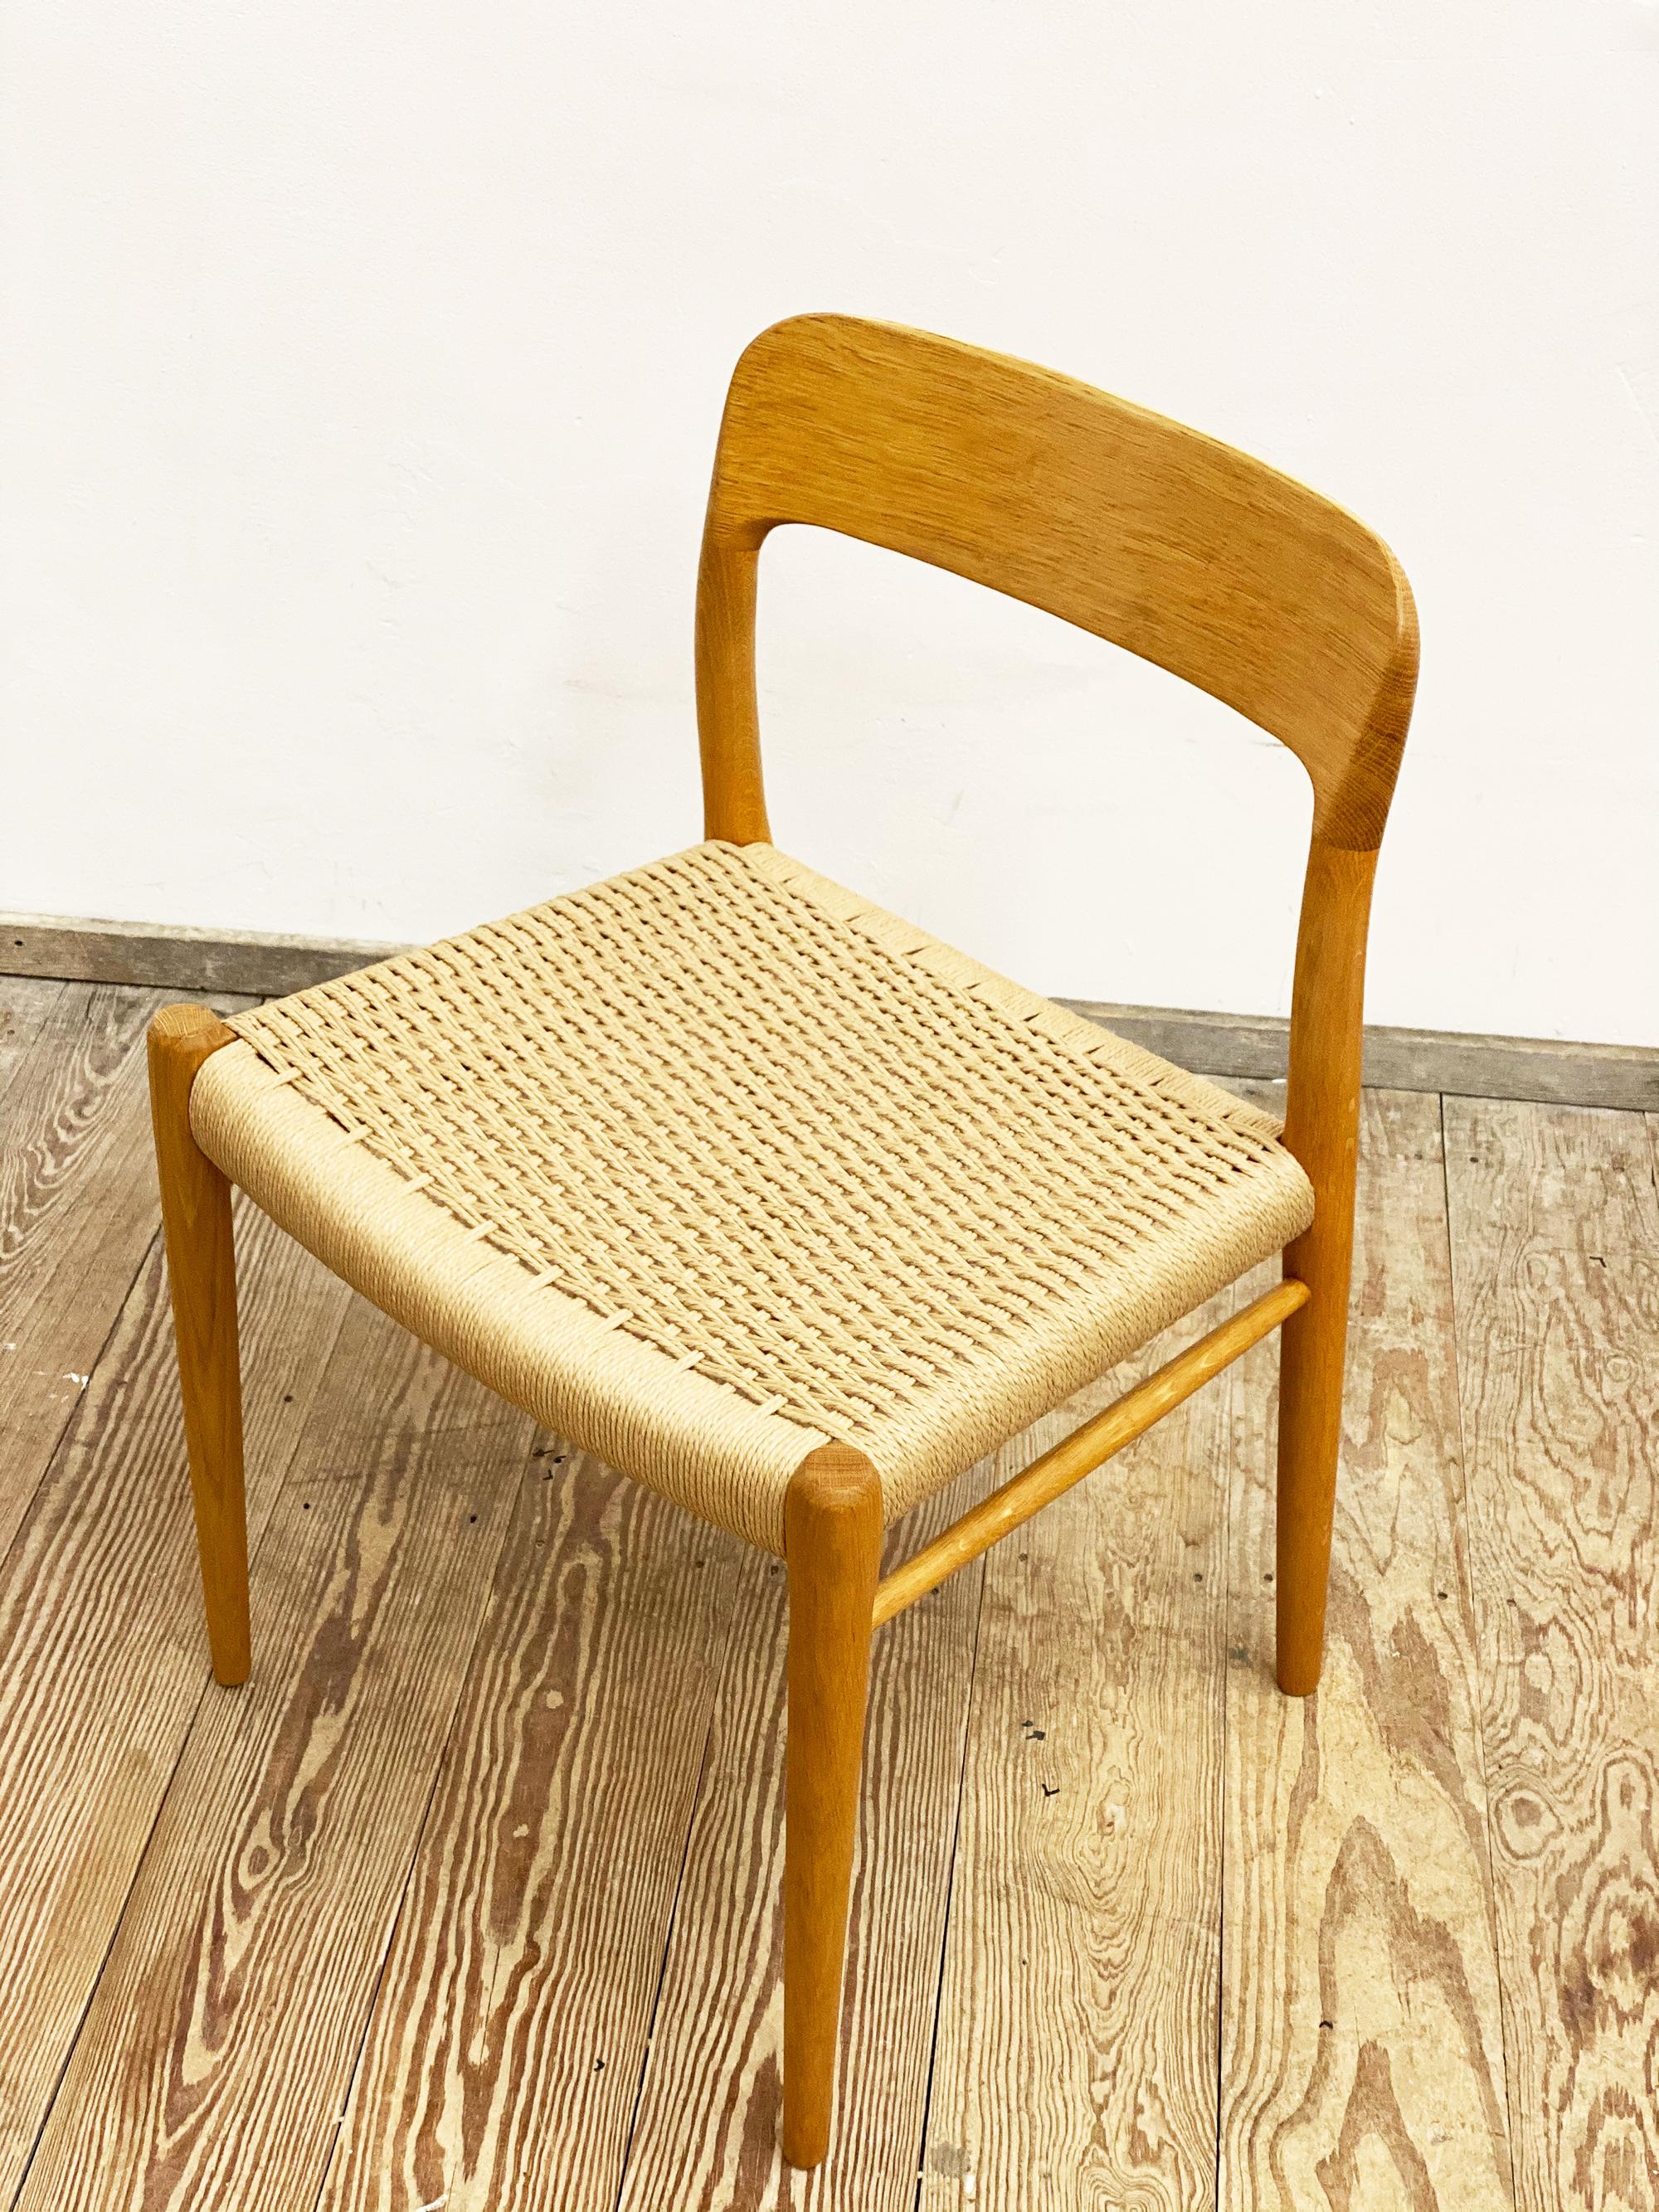 Mid-20th Century Mid-Century Oak Dining or Side Chair #75 by Niels O. Møller for J. L. Moller